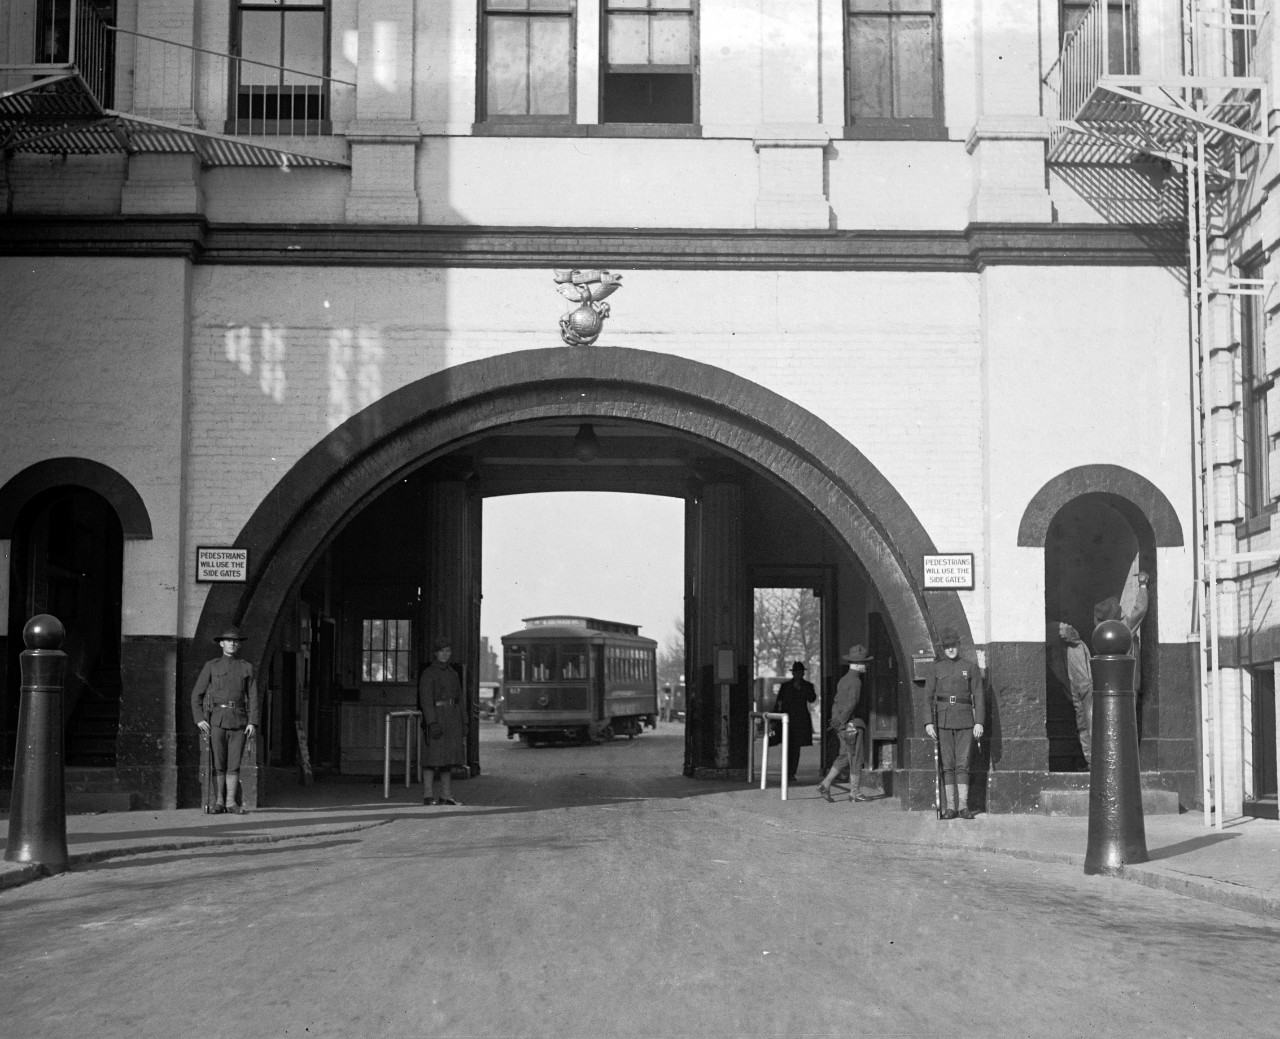 LC-DIG-NPCC-07624:  Latrobe Gate, Washington Navy Yard, 1923.   Washington Navy Yard, Washington D.C., Latrobe Gate, looking north, out of the Navy Yard.  Note, U.S. Marines on duty, Marine Corps Insignia, and the turning trolley.   National Photo Company Collection.  Courtesy of the Library of Congress.  